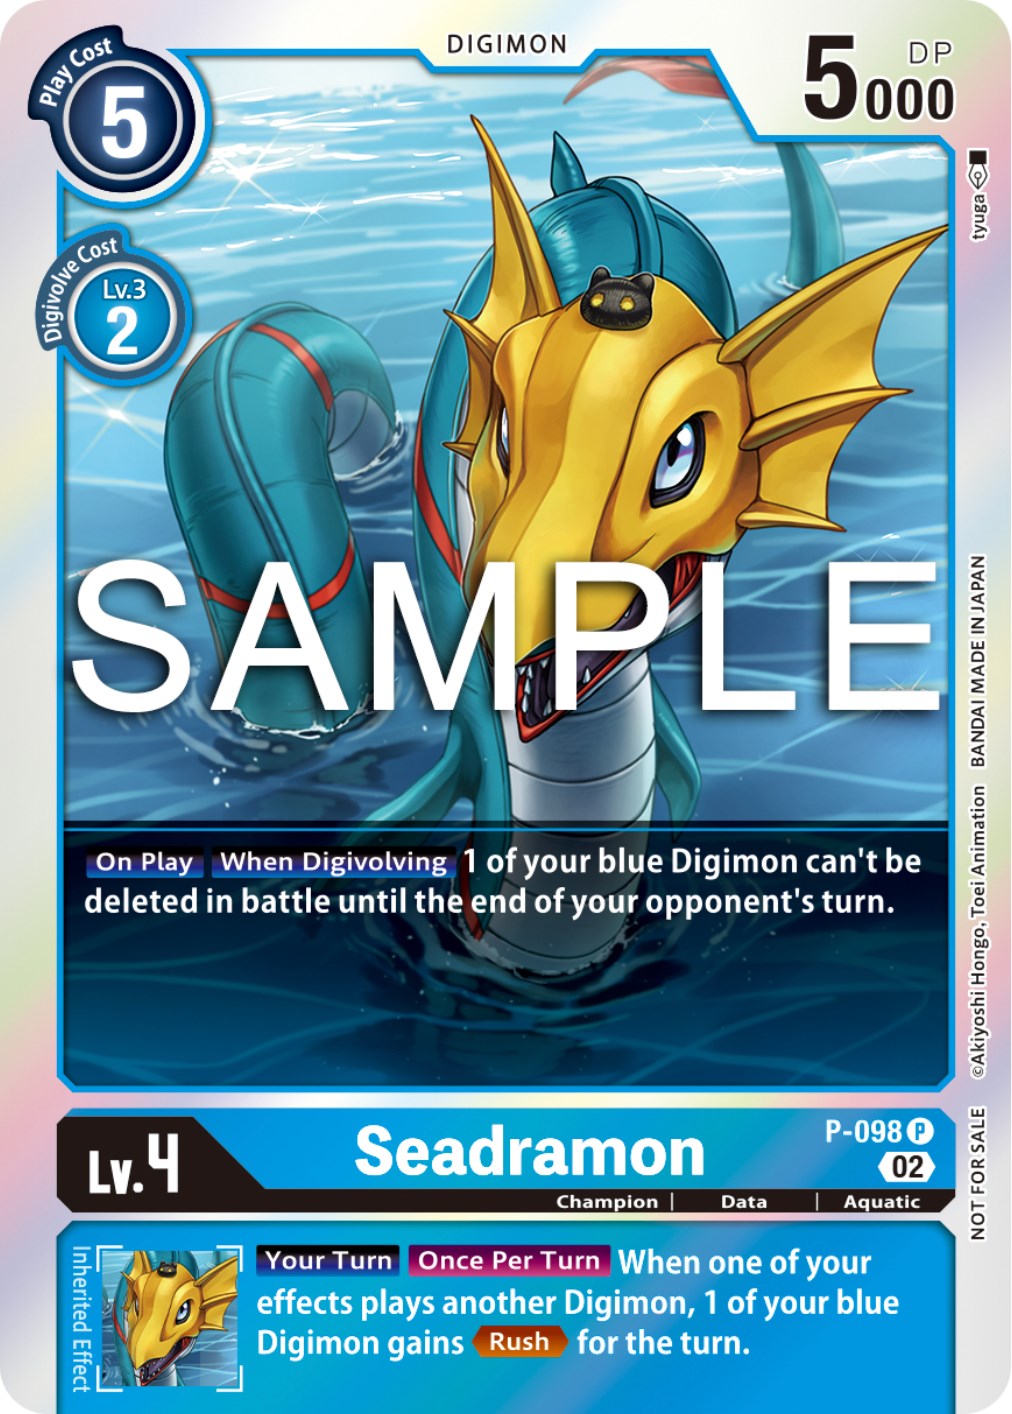 Seadramon [P-098] - P-098 (Limited Card Pack Ver.2) [Promotional Cards] | Amazing Games TCG